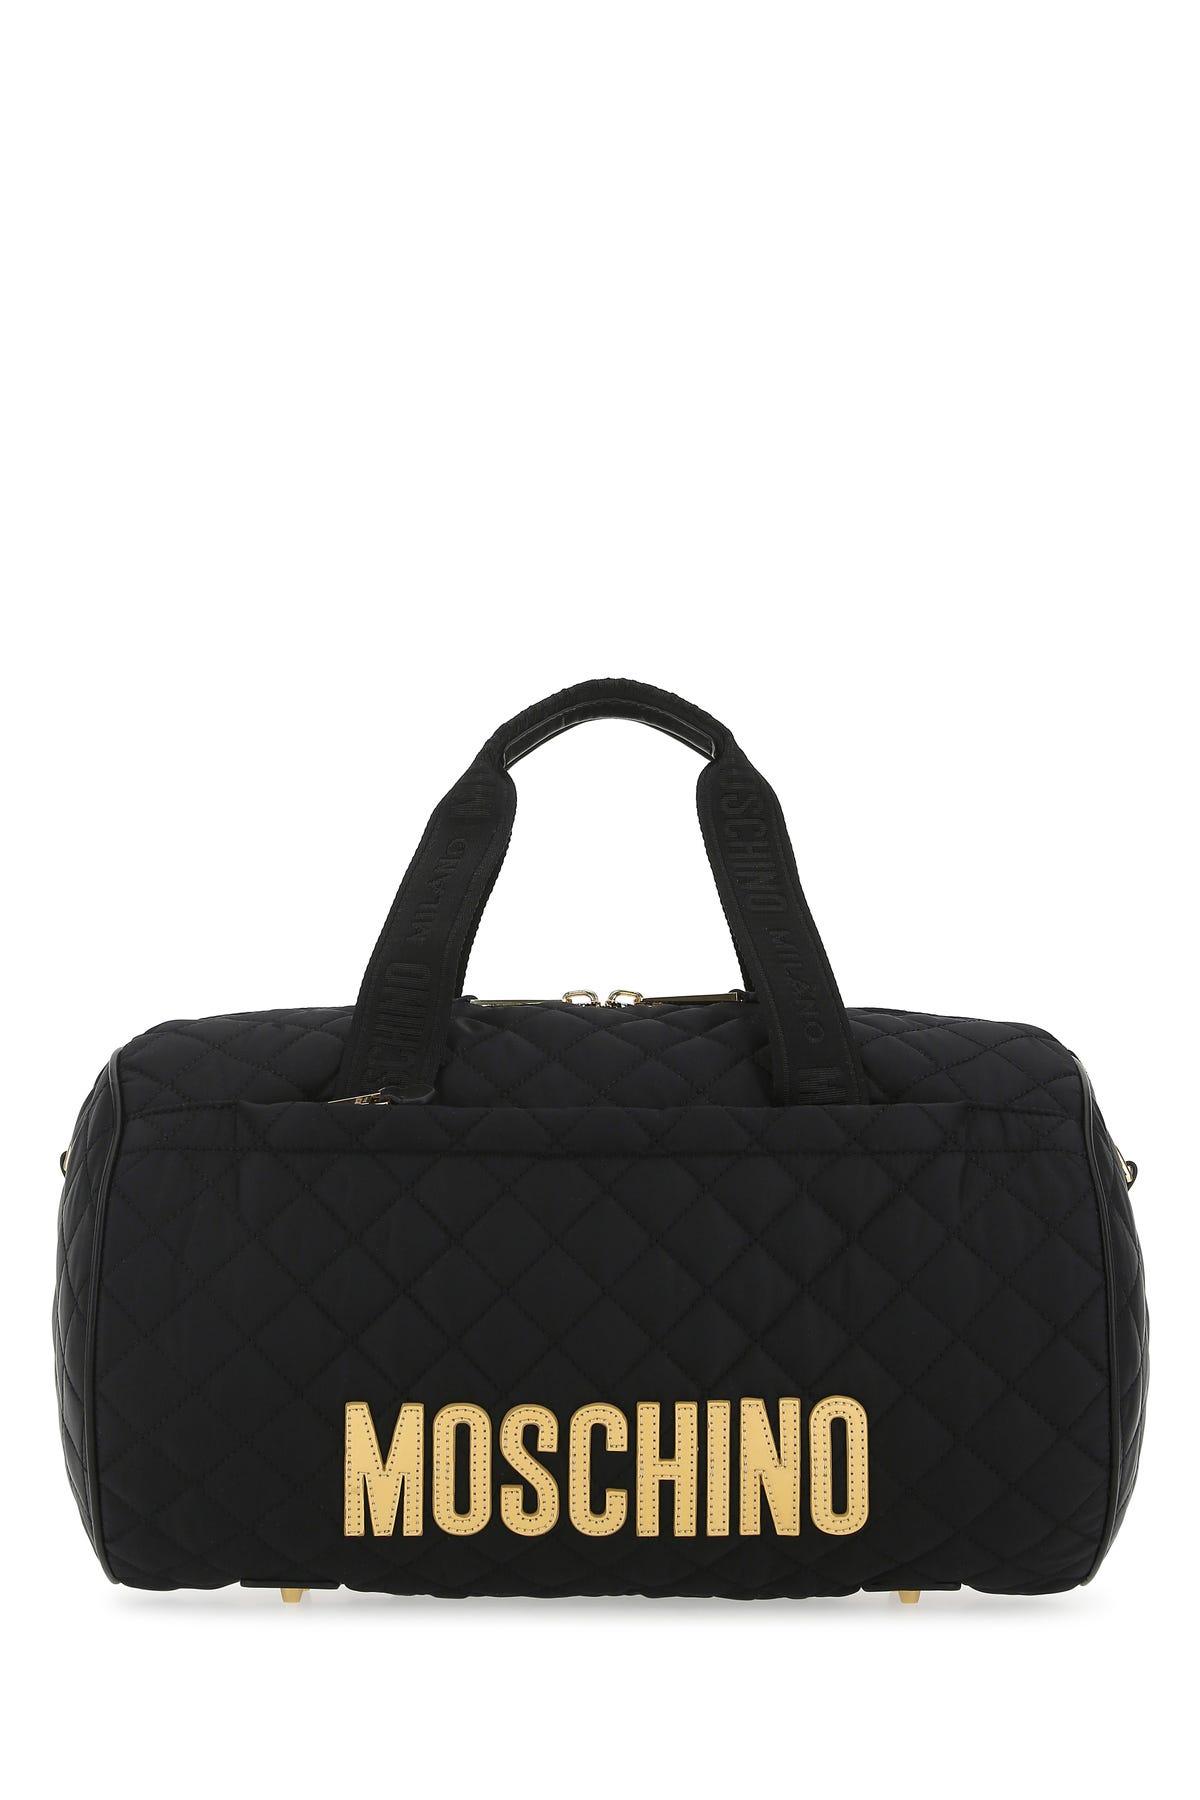 Moschino Quilted Zipped Holdall in Black | Lyst